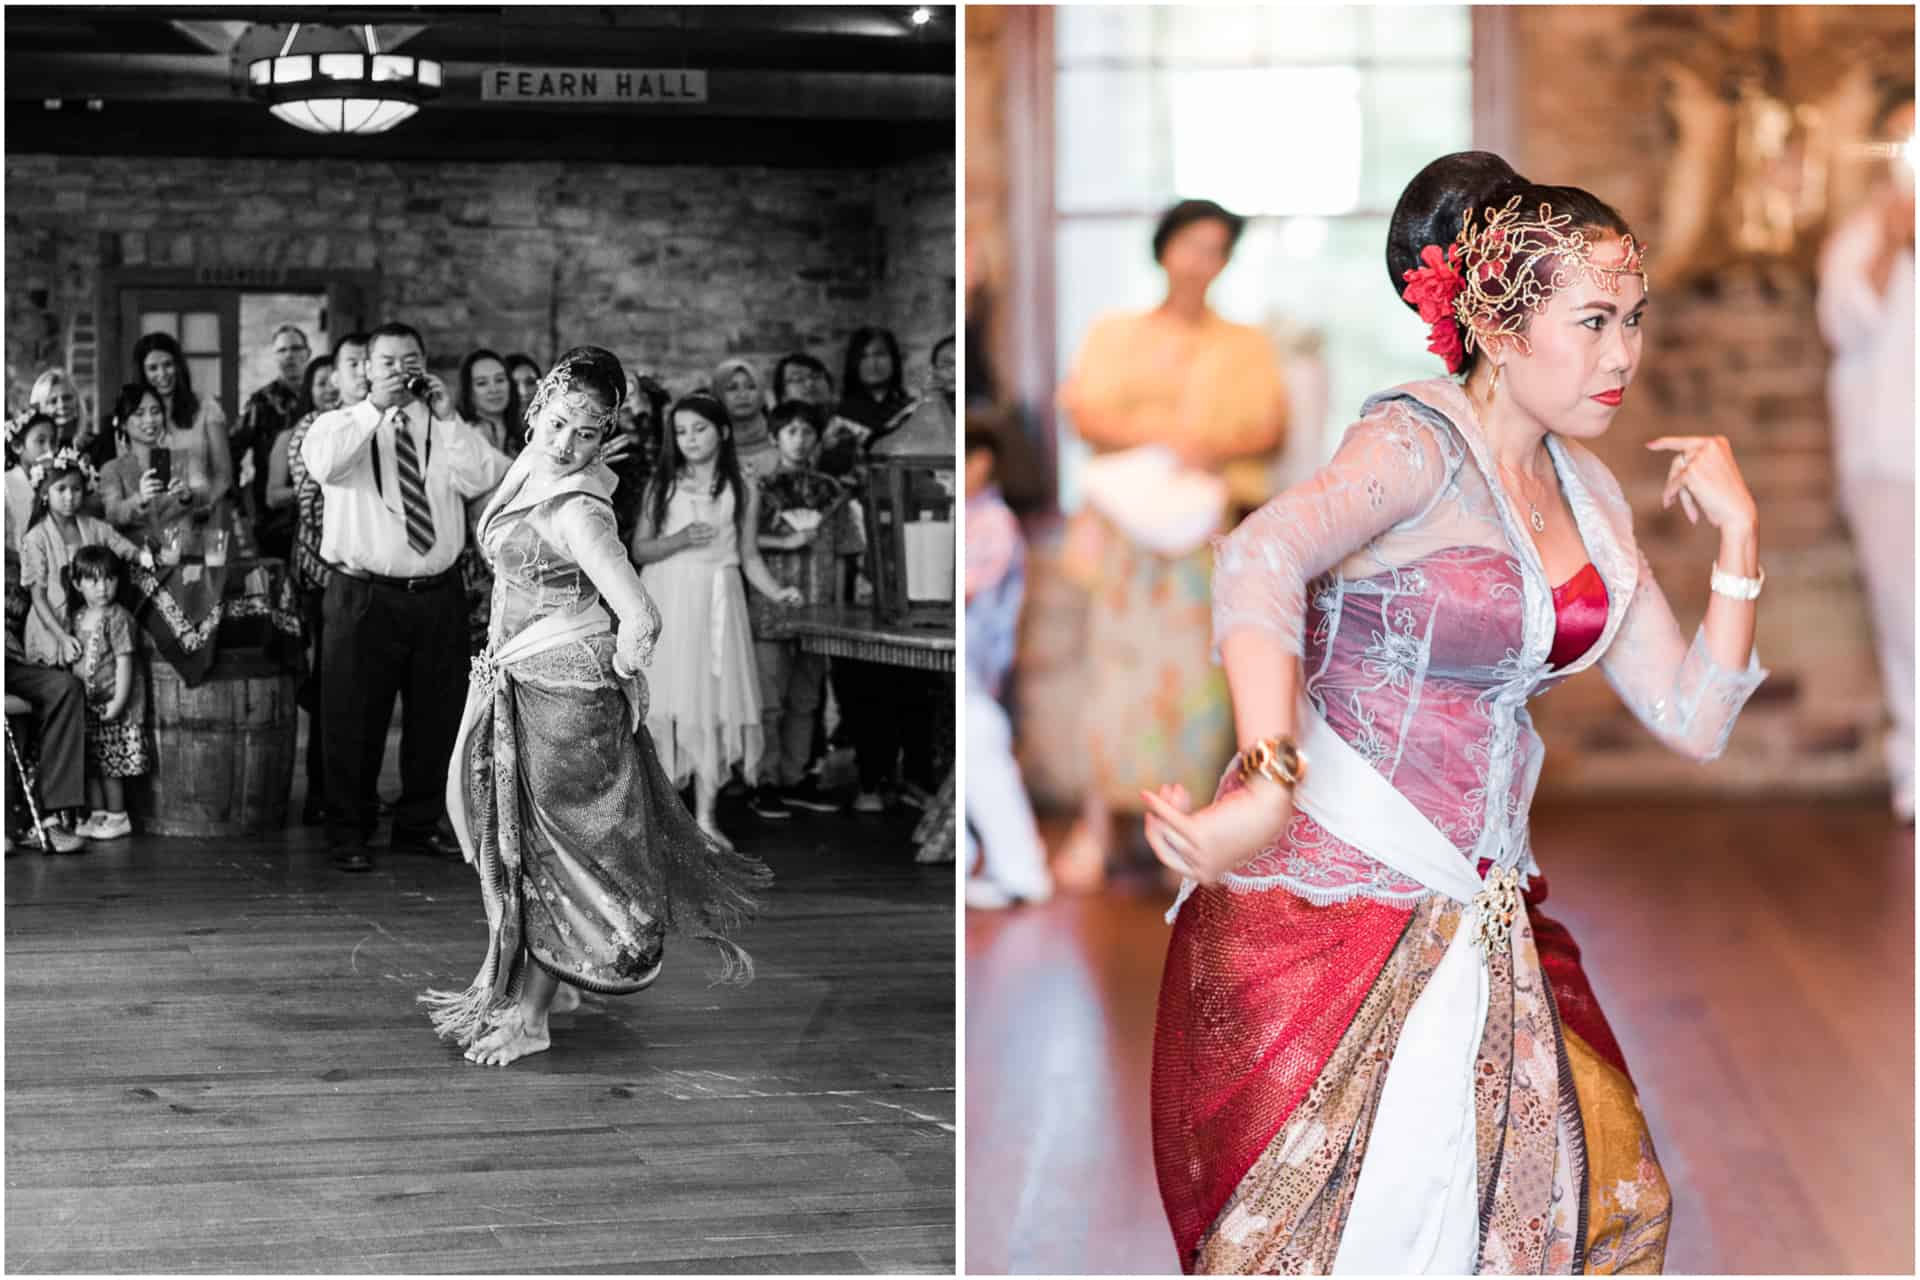 Nadia + Atte - Traditional Indonesian Dance at Monte Sano Lodge Wedding